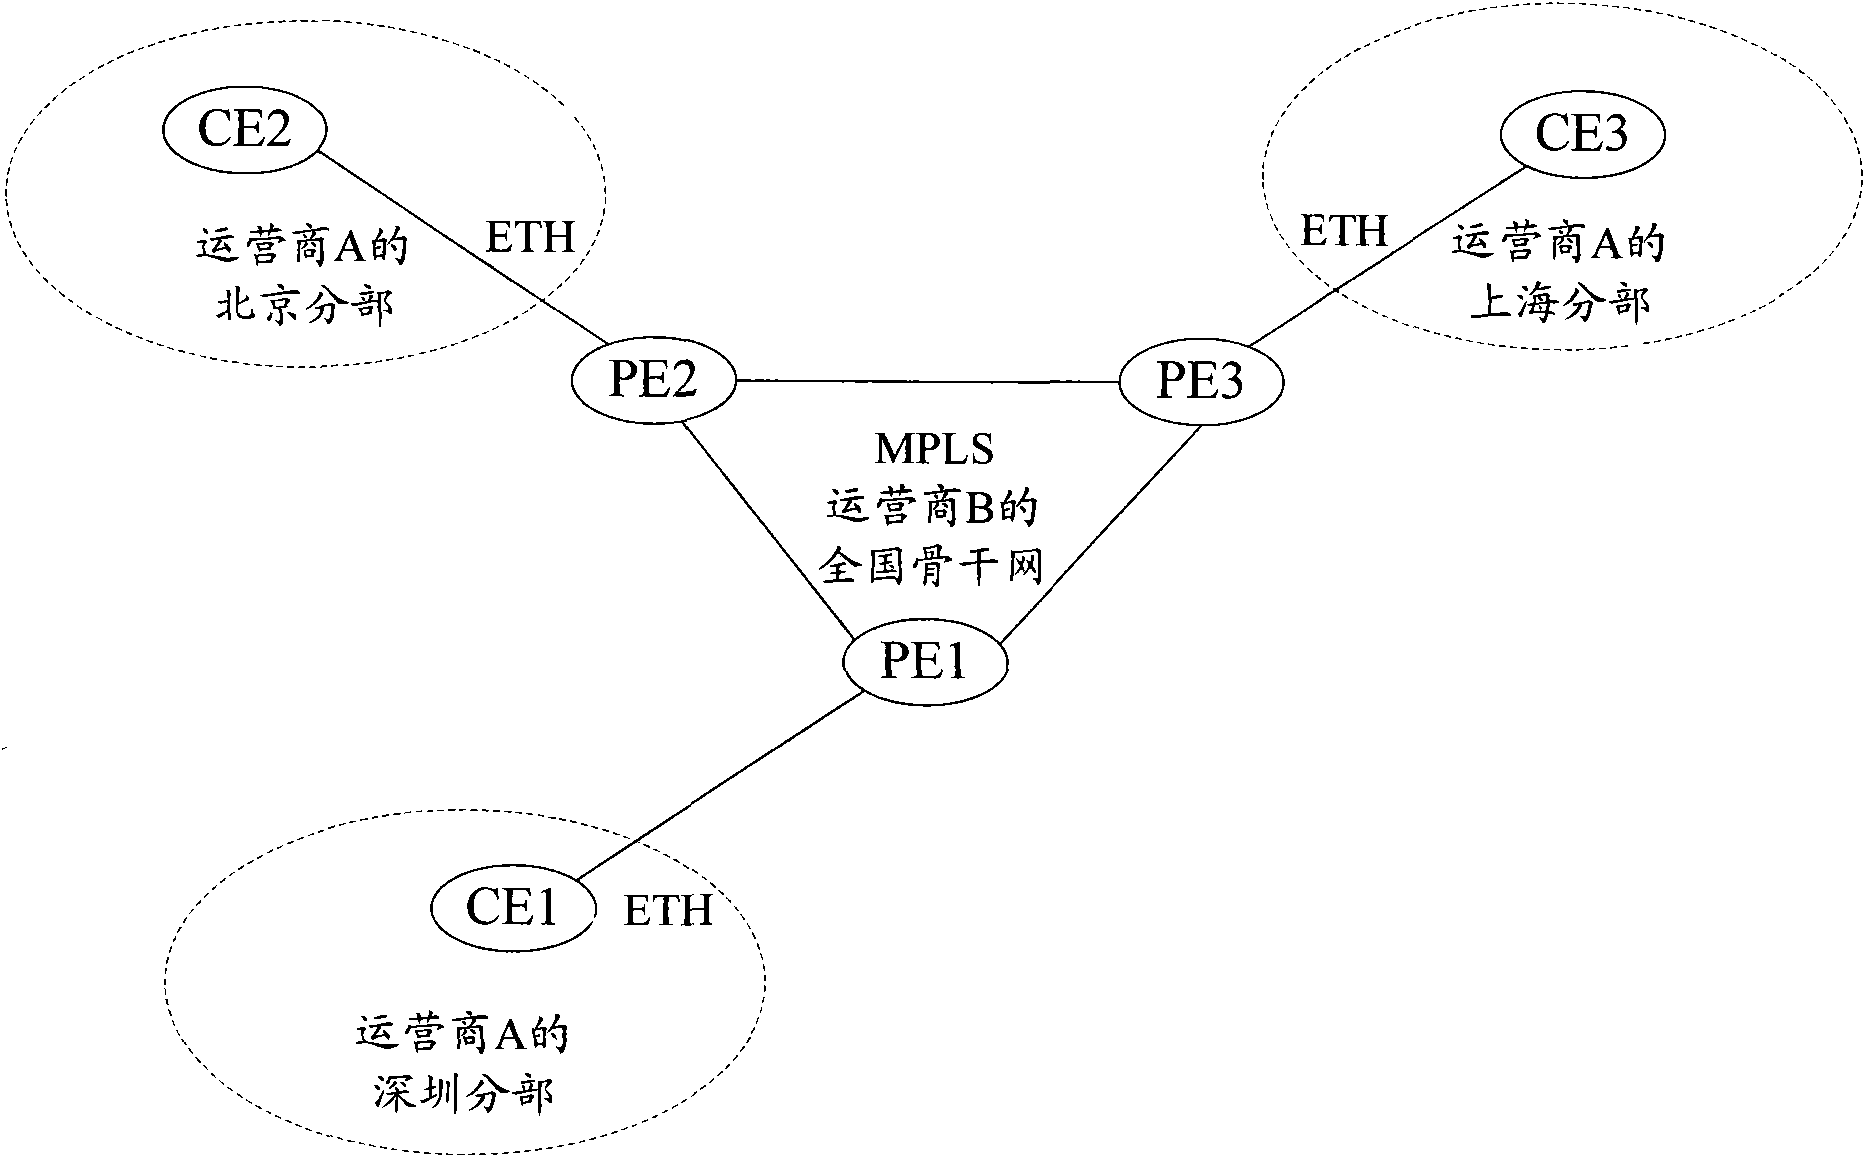 Method of transmitting and receiving message and a provider edge router